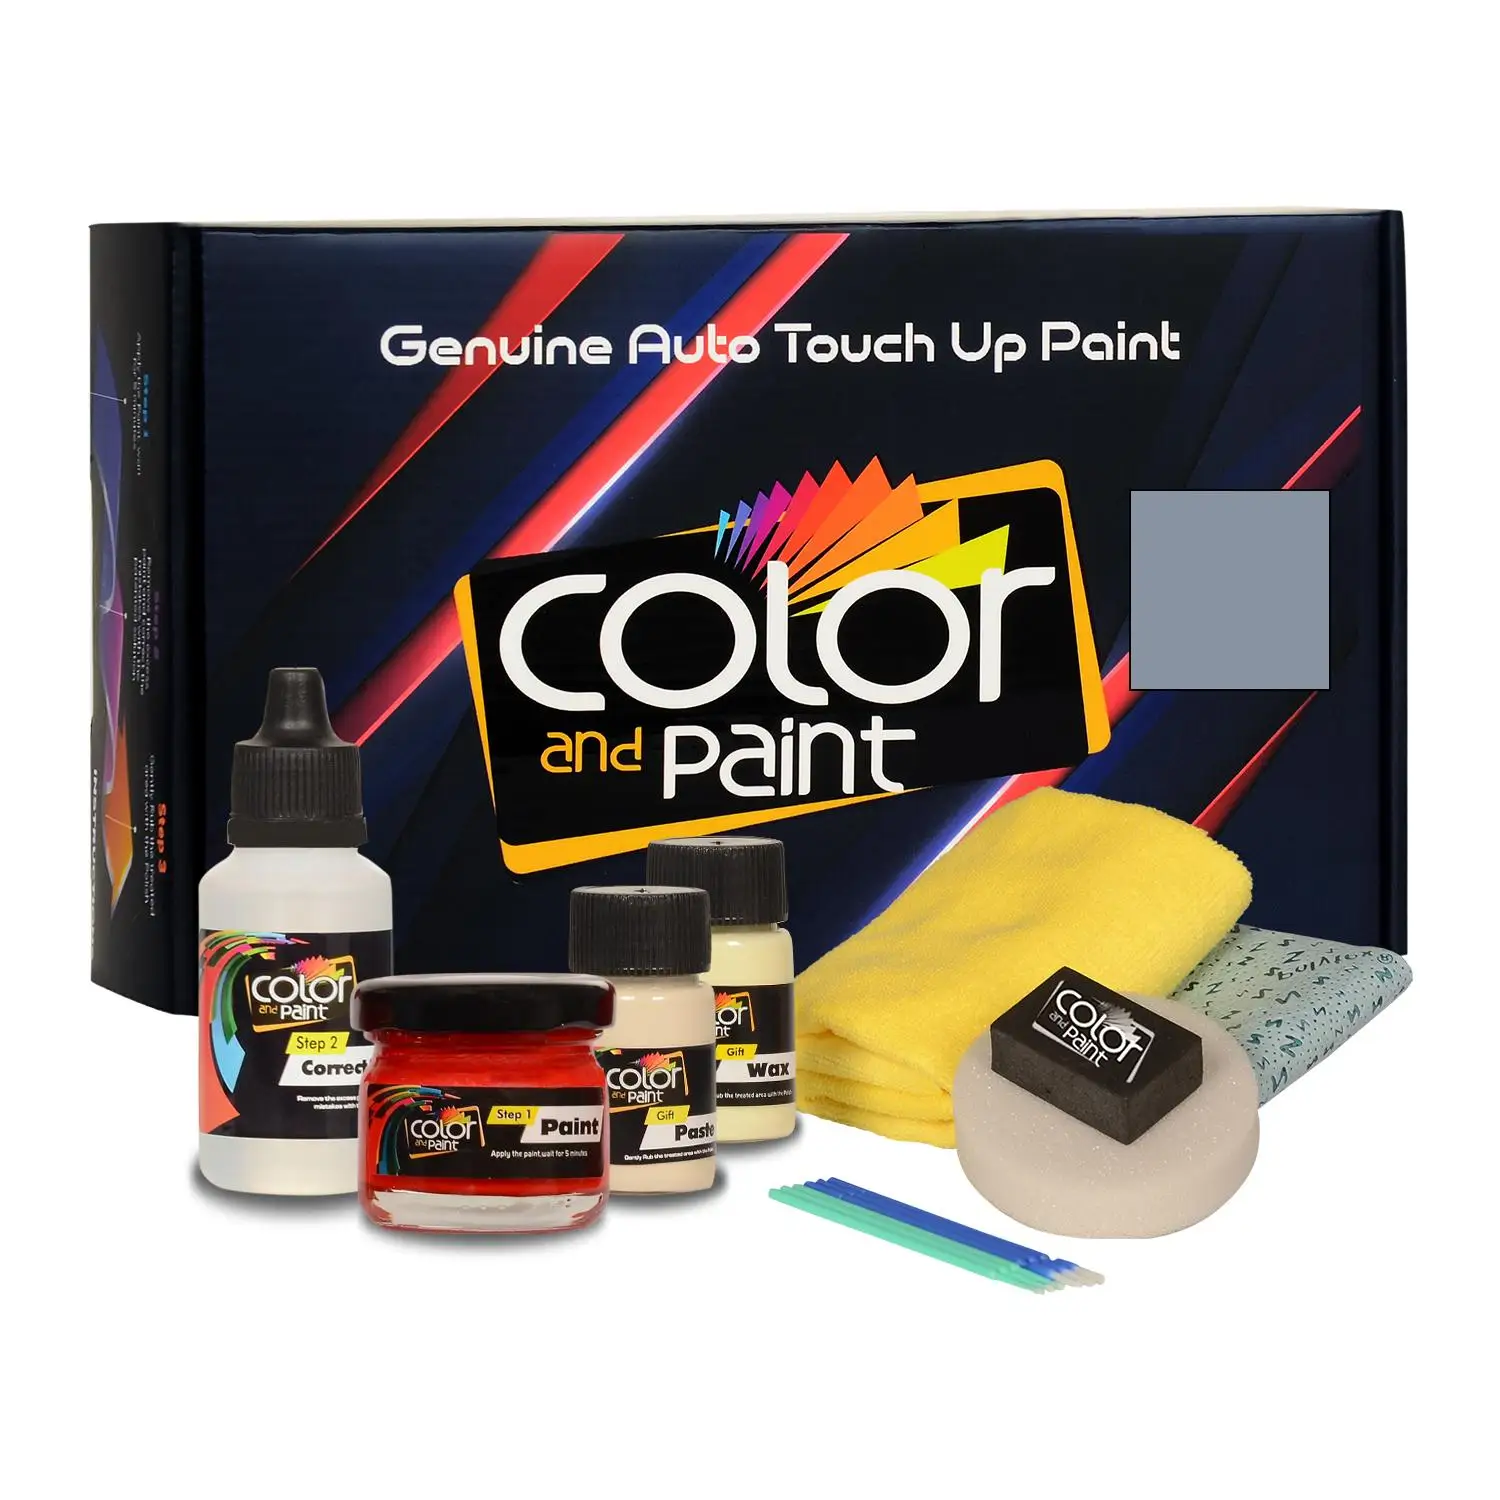 

Color and Paint compatible with Fiat Automotive Touch Up Paint - GRIGIO LUNARE PEARL - 608/B - Basic care